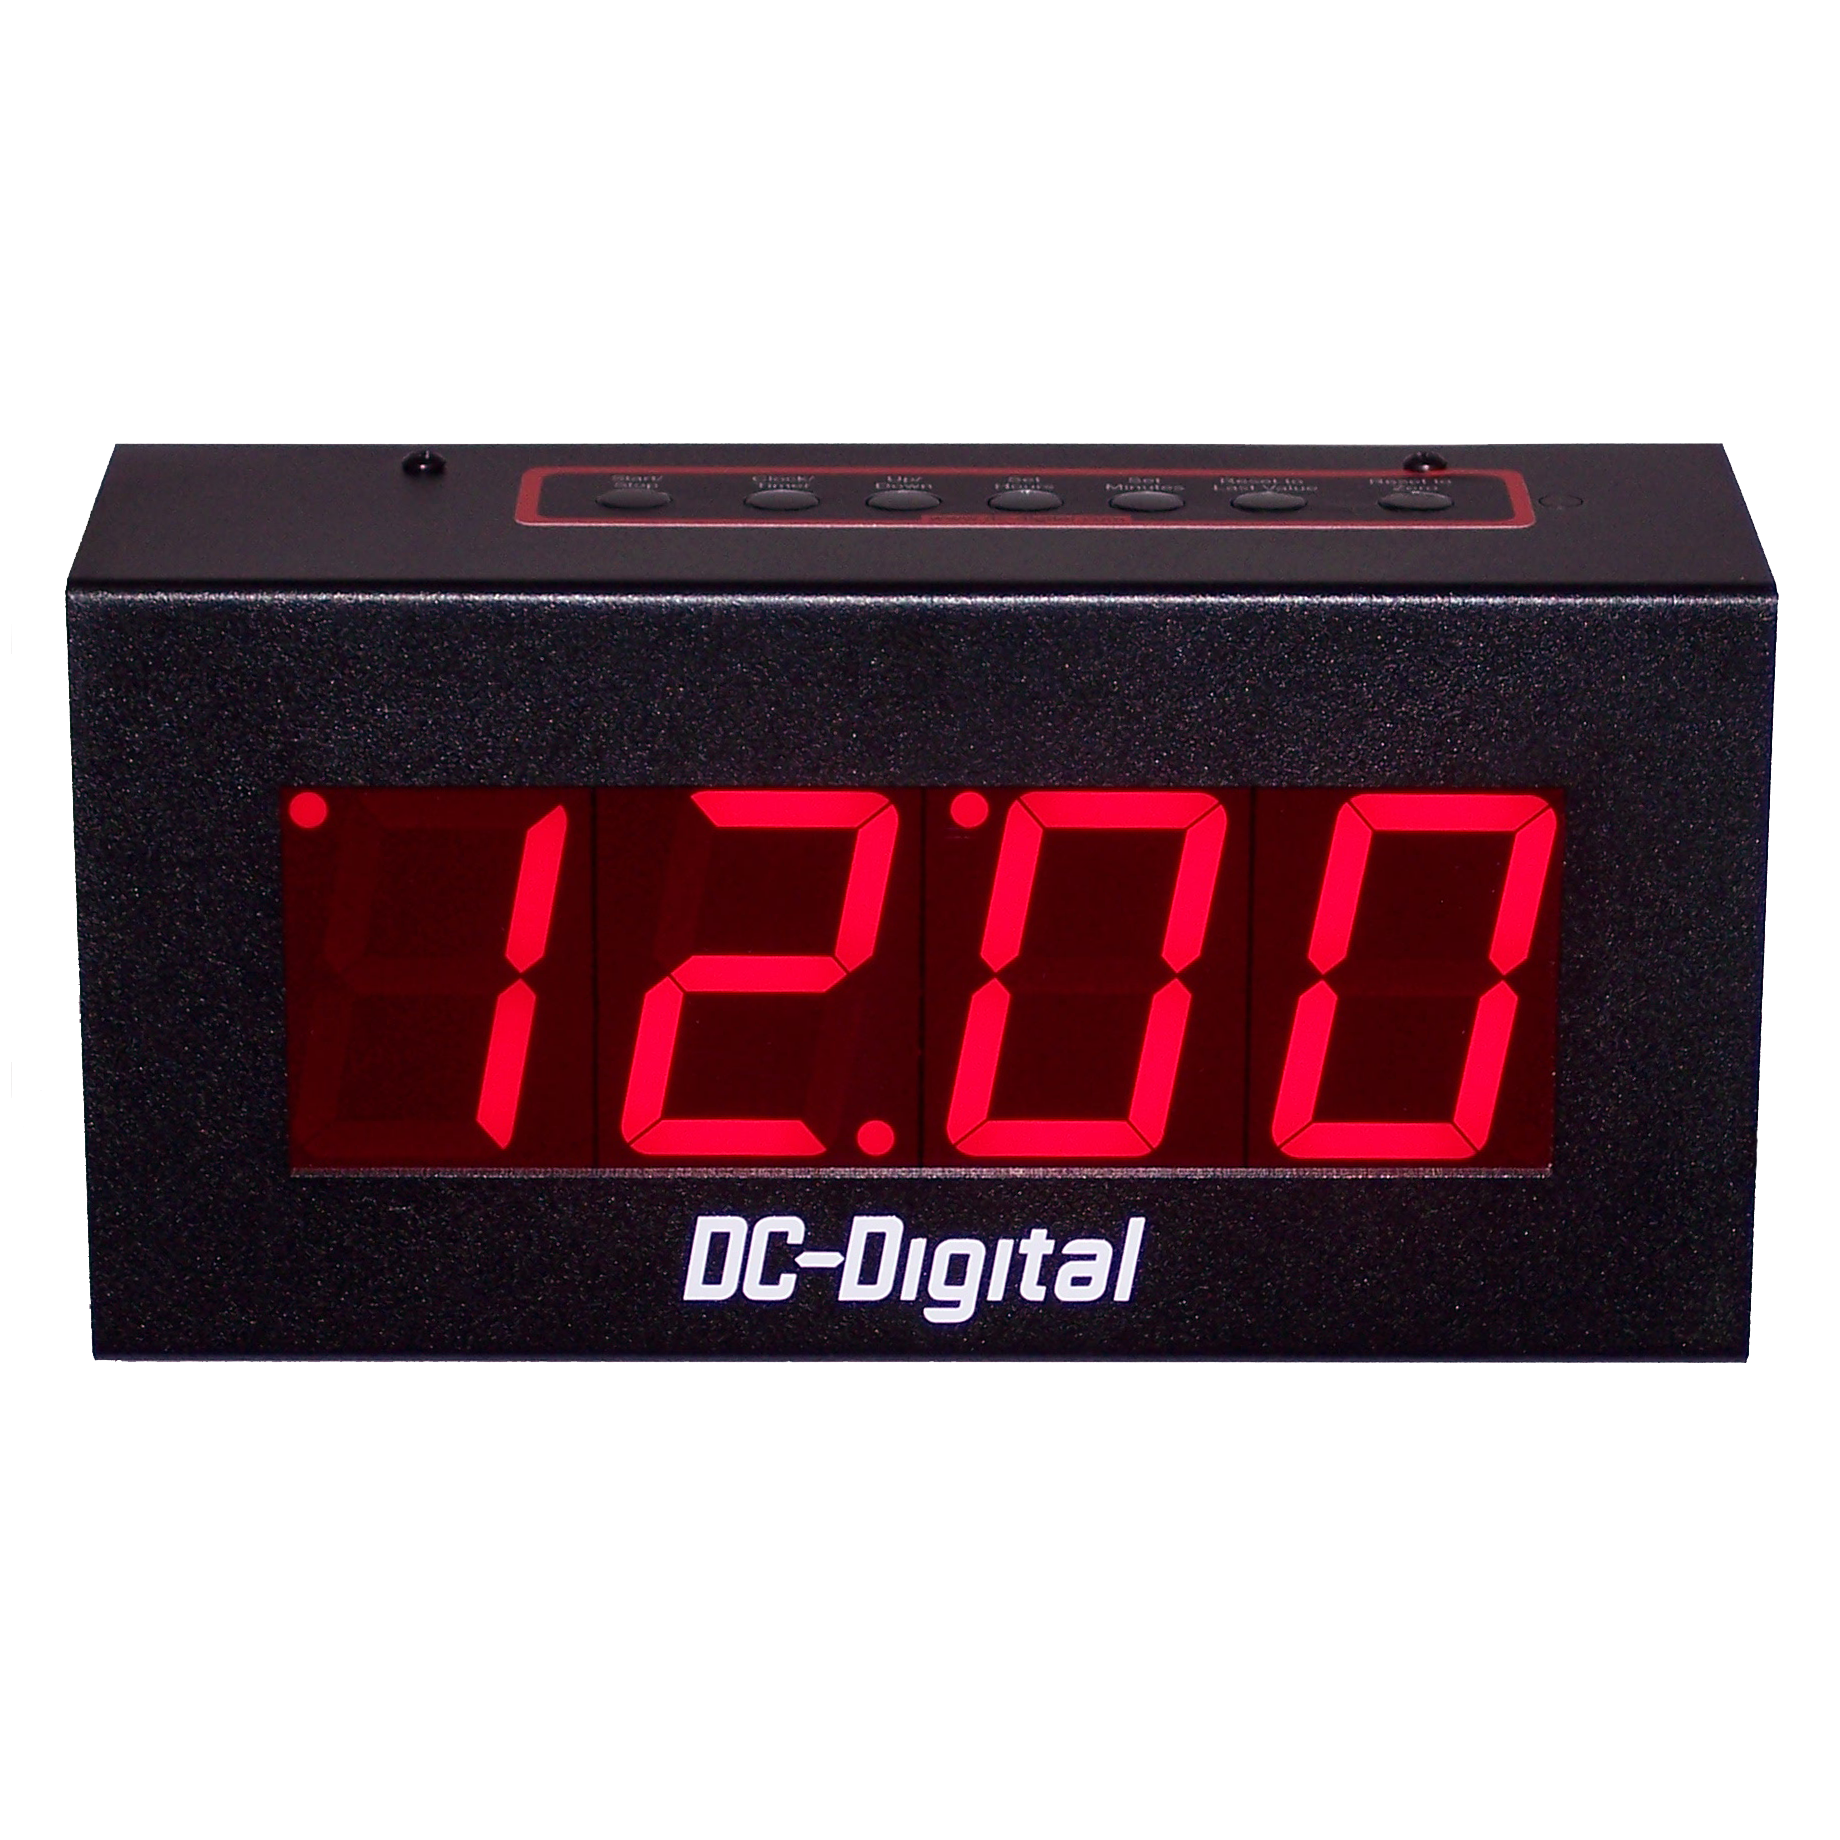 (DC-25UT) 2.3 Inch LED Digital, Top Mounted Push-Button Controlled, Count Up timer, Countdown Timer, Time of Day Clock